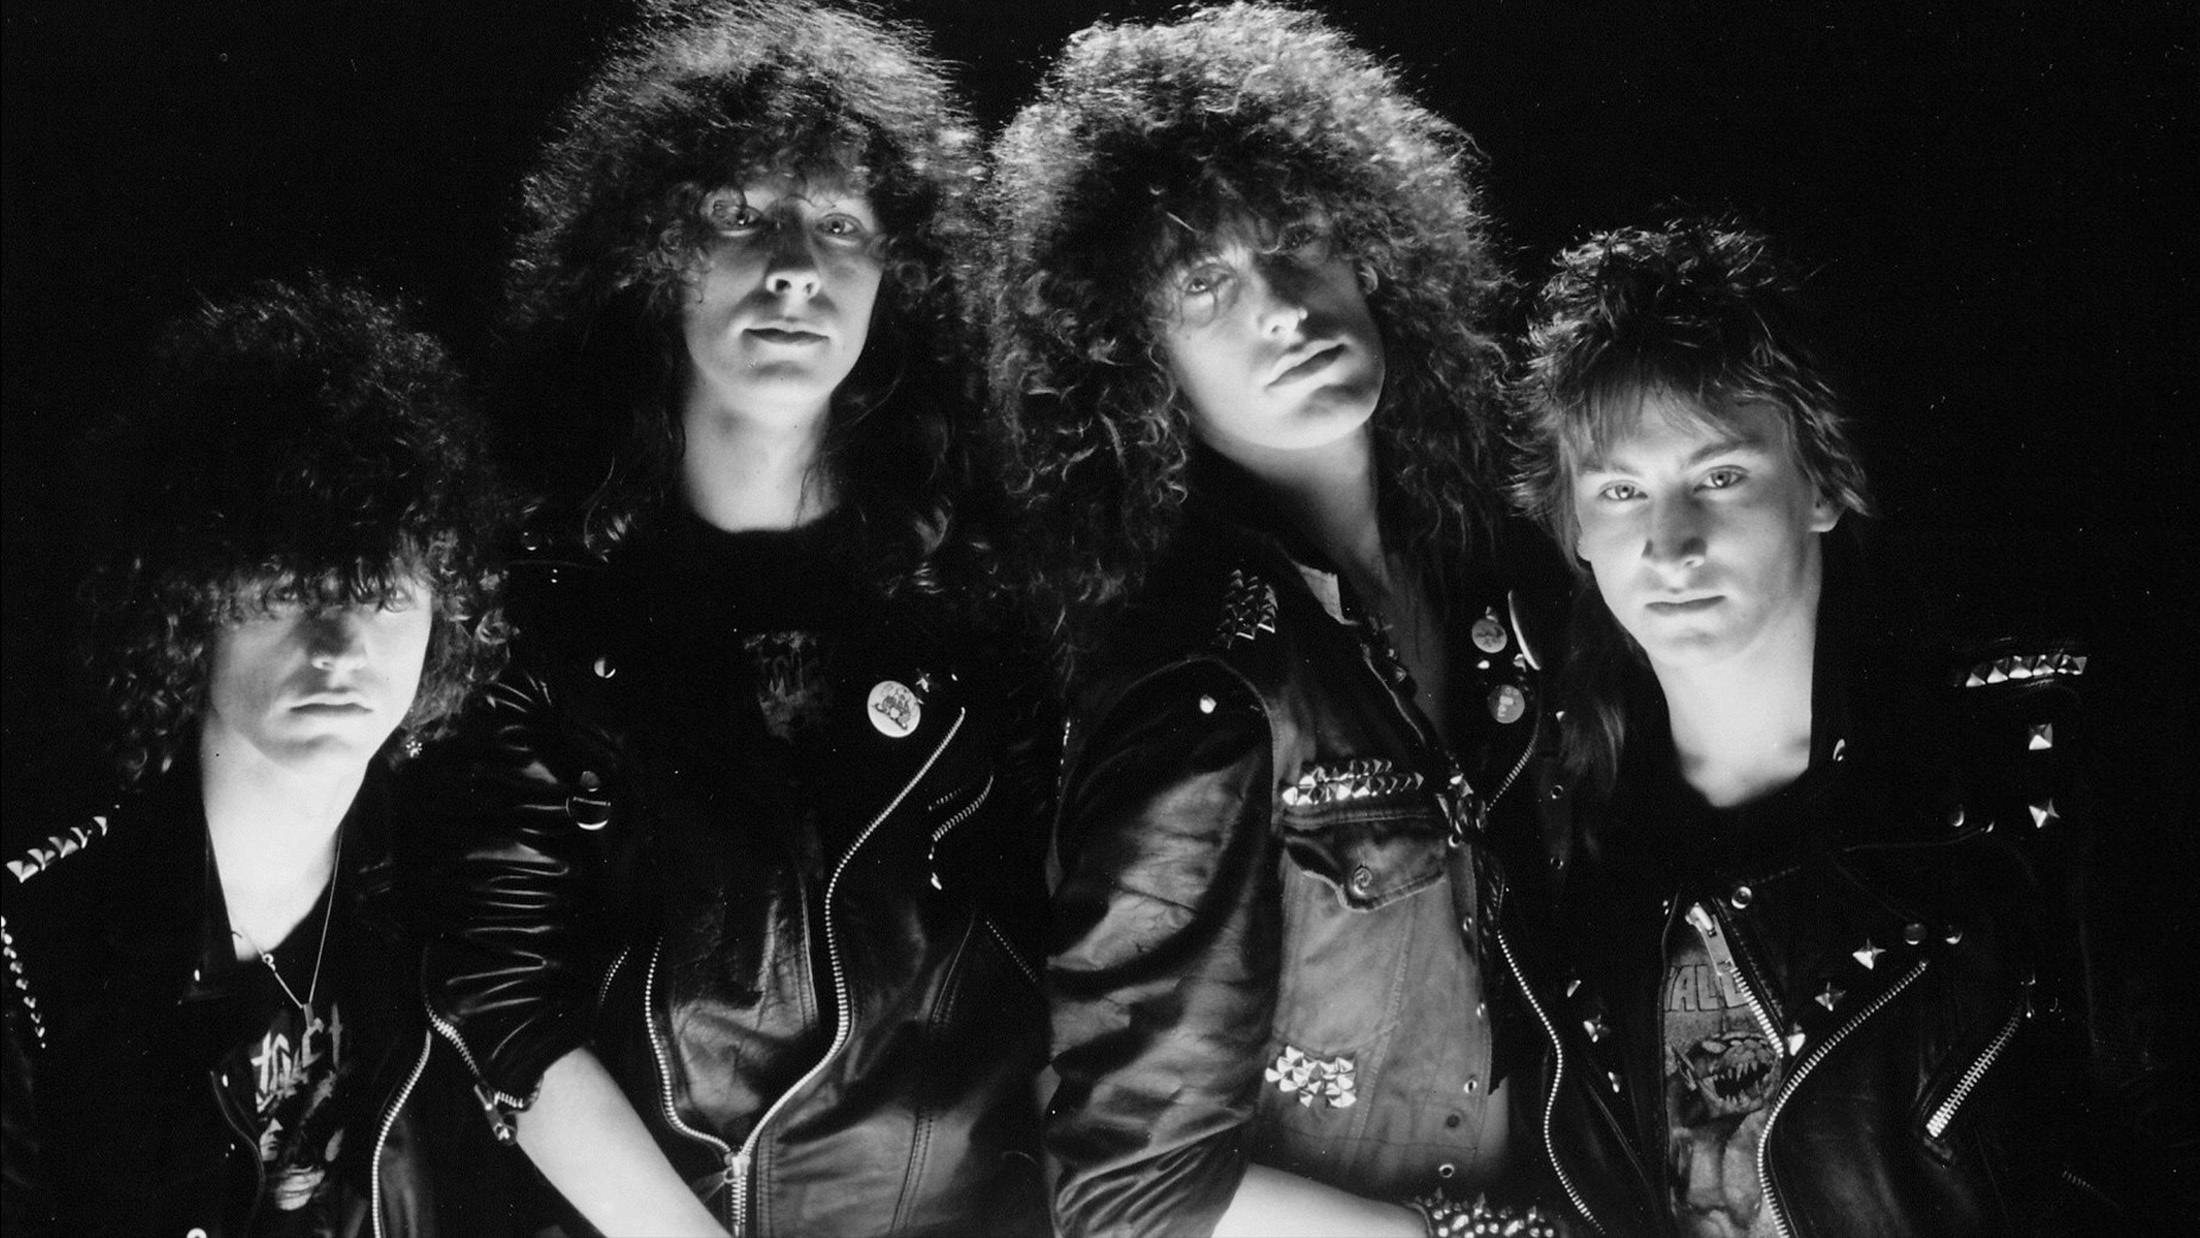 The first photo session with the new line up in 1987 for Release From Agony. Our drummer Oli (on the right) looks so very innocent. He came from a jazz background into the crazy metal world and from then on his whole life became different. Hey Oli, you are welcome!